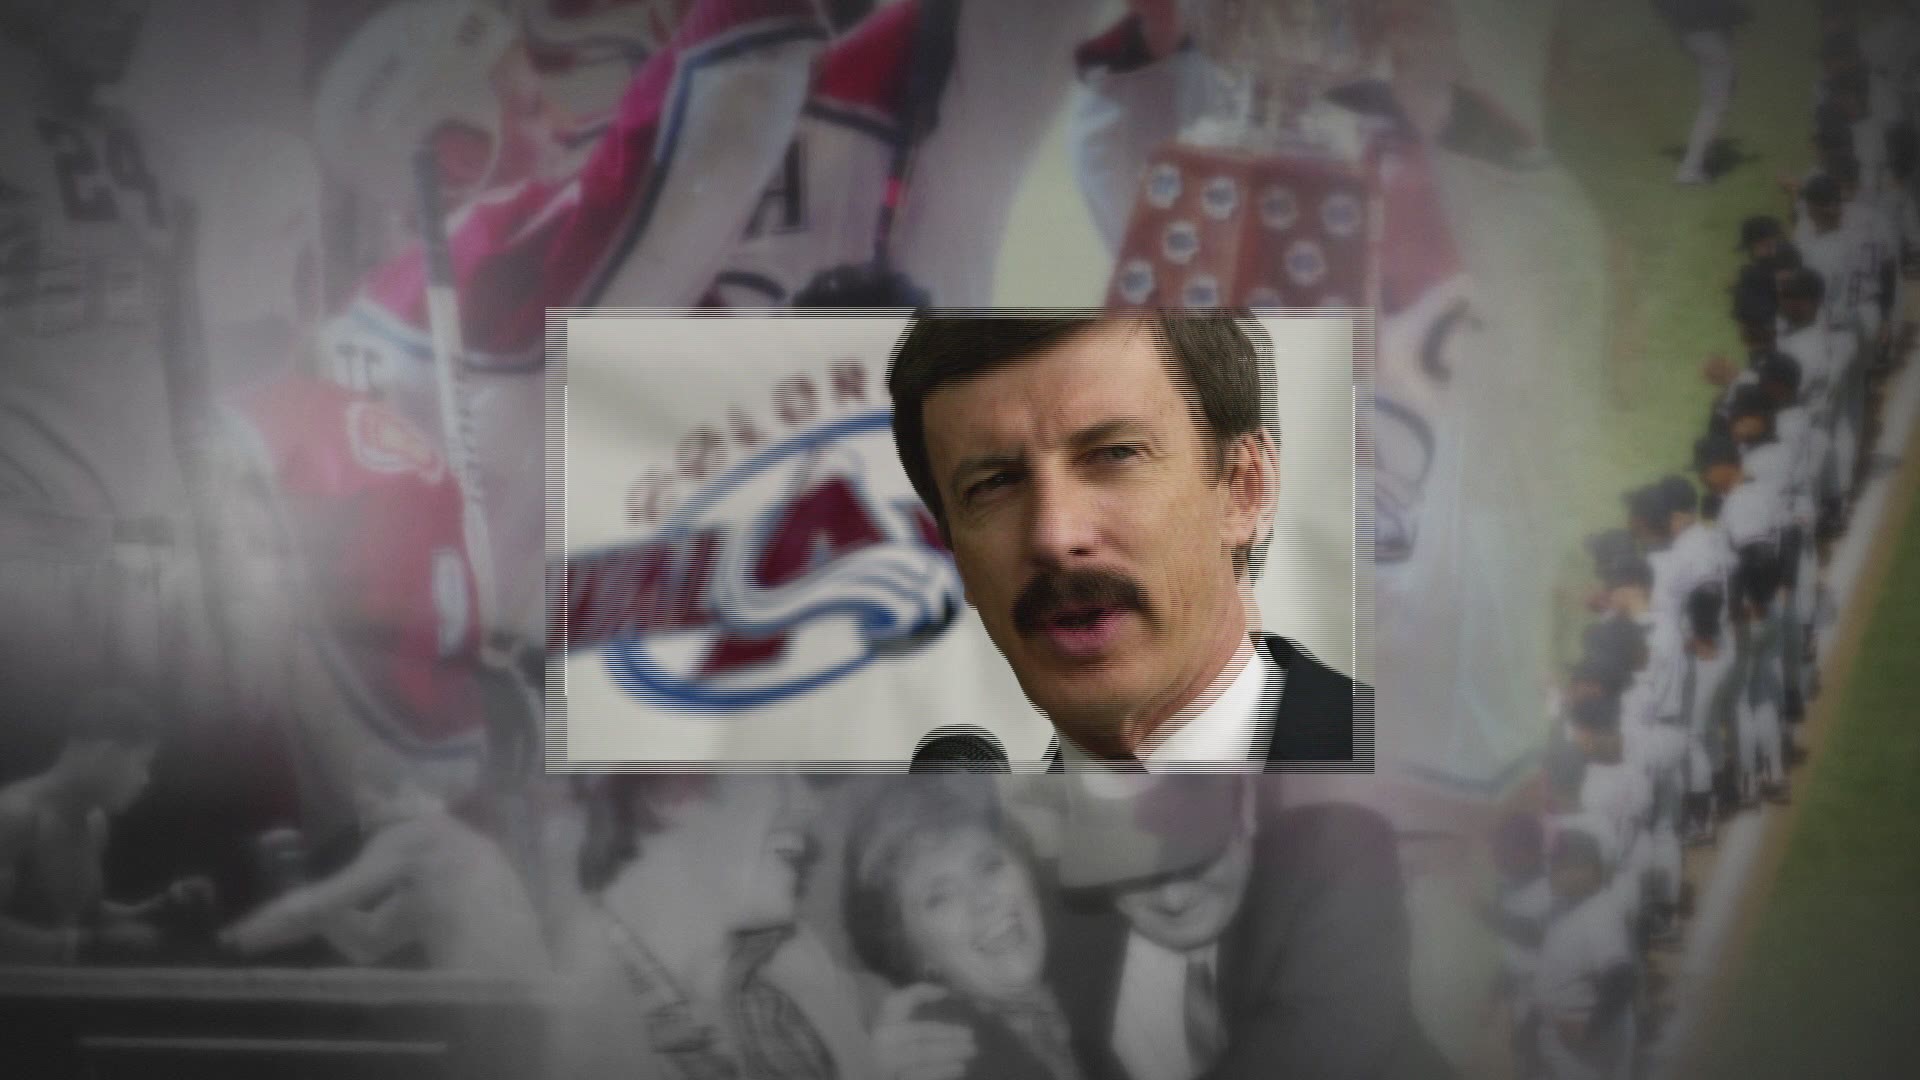 On April 24, 2000, Stan Kroenke purchased the Colorado Avalanche, Denver Nuggets and Pepsi Center for roughly $450 million.